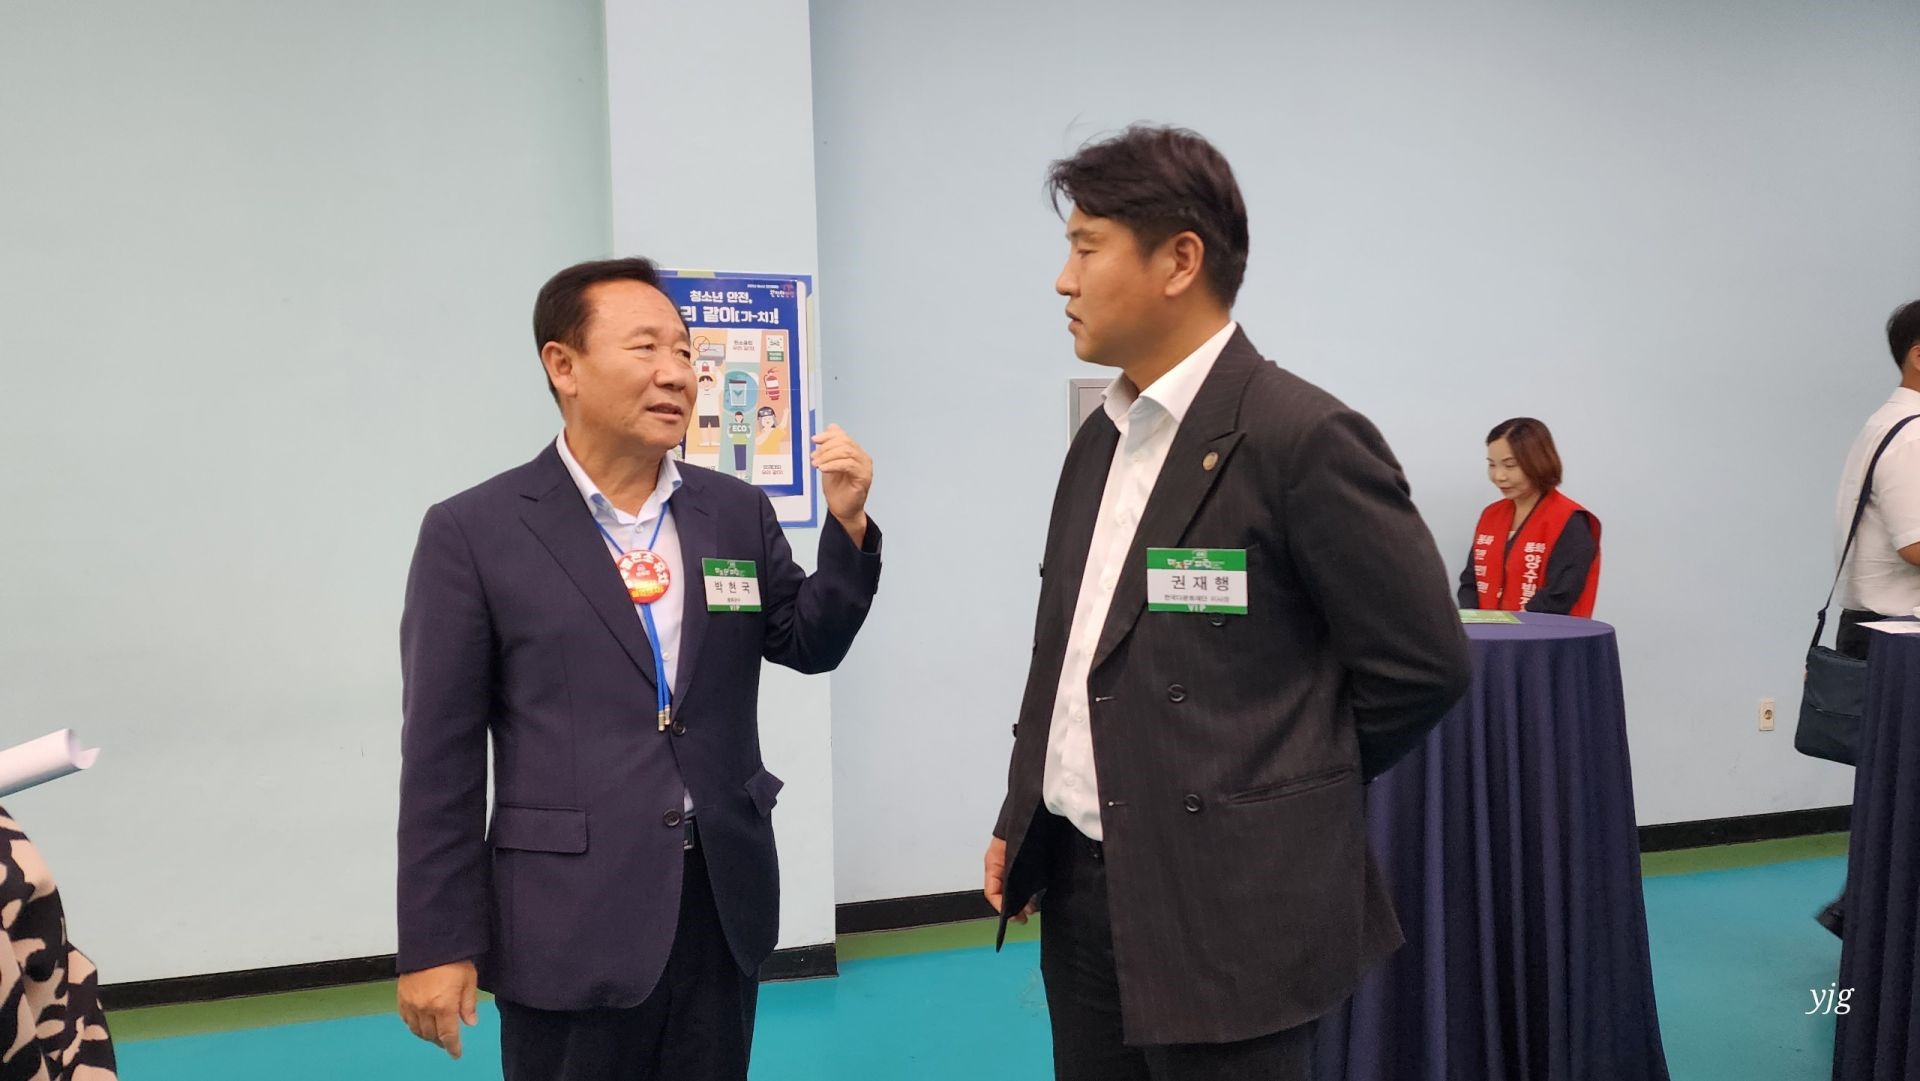 Mr. Kwon Jae Haeng discussed this with Mr. Lee Hoon - Chairman of the Hwasan family.